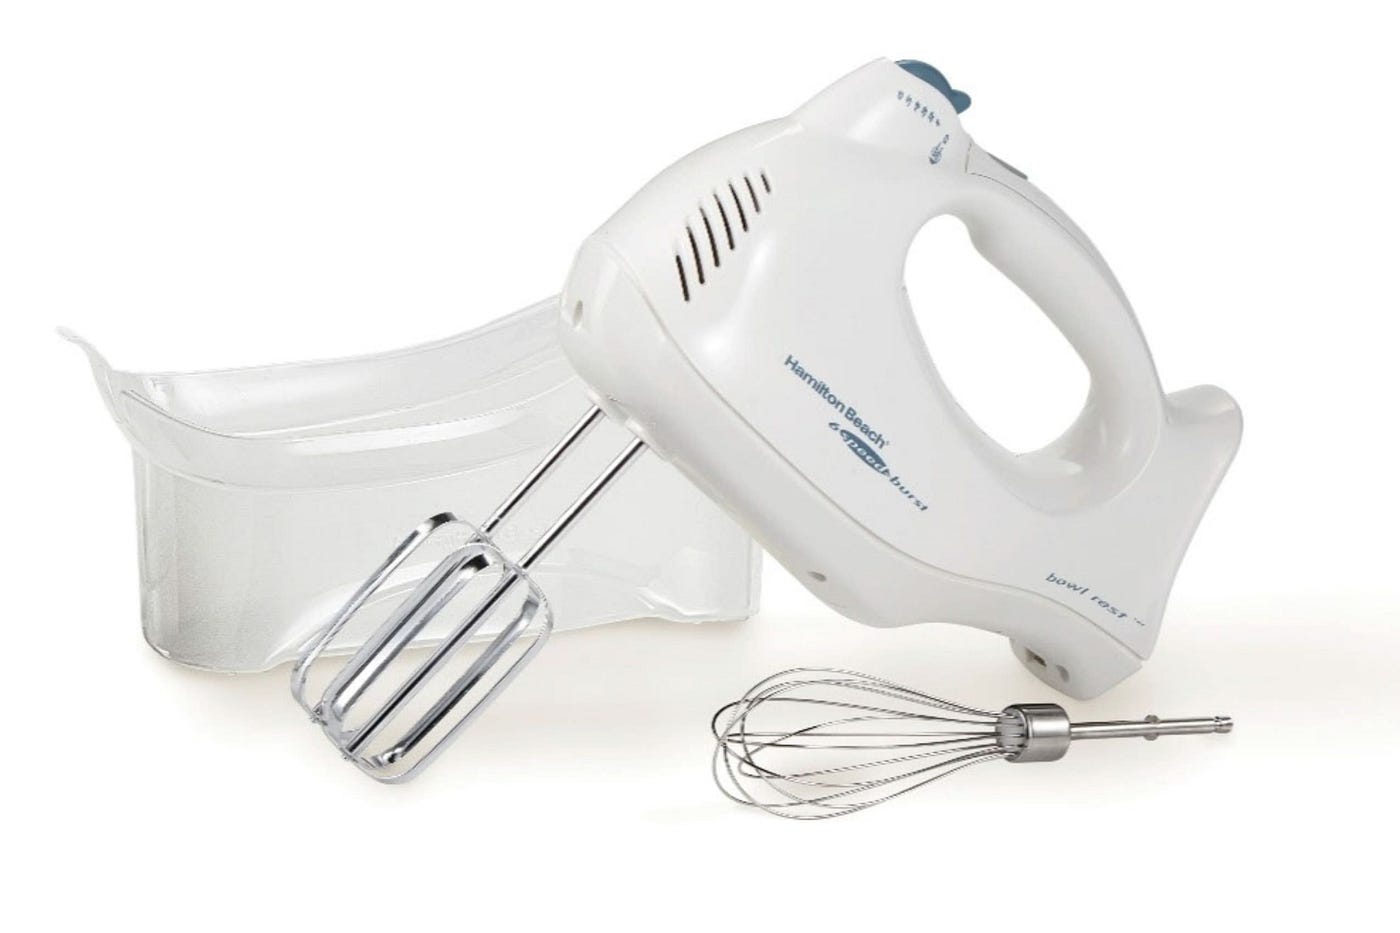 Kitchenaid 9-speed hand mixer, Full review, by Gianluca Dati